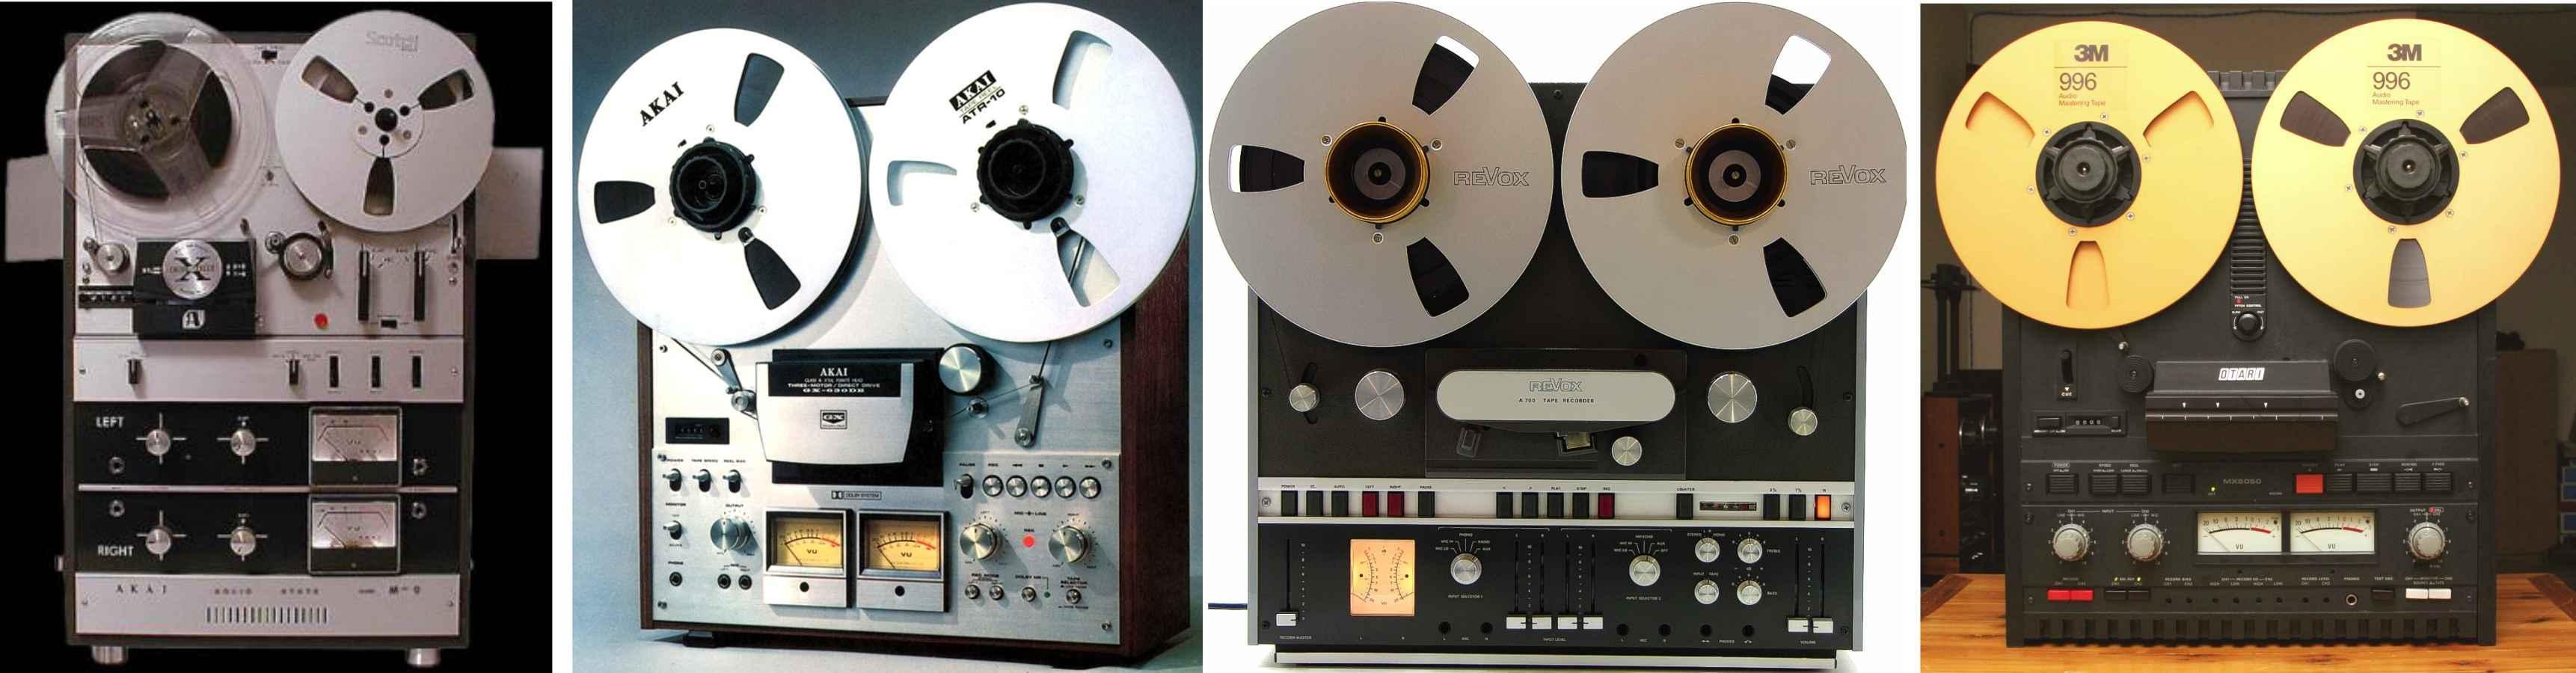 Reel To Reel Tape Recorders / Decks… Ready to GO! RESTORED